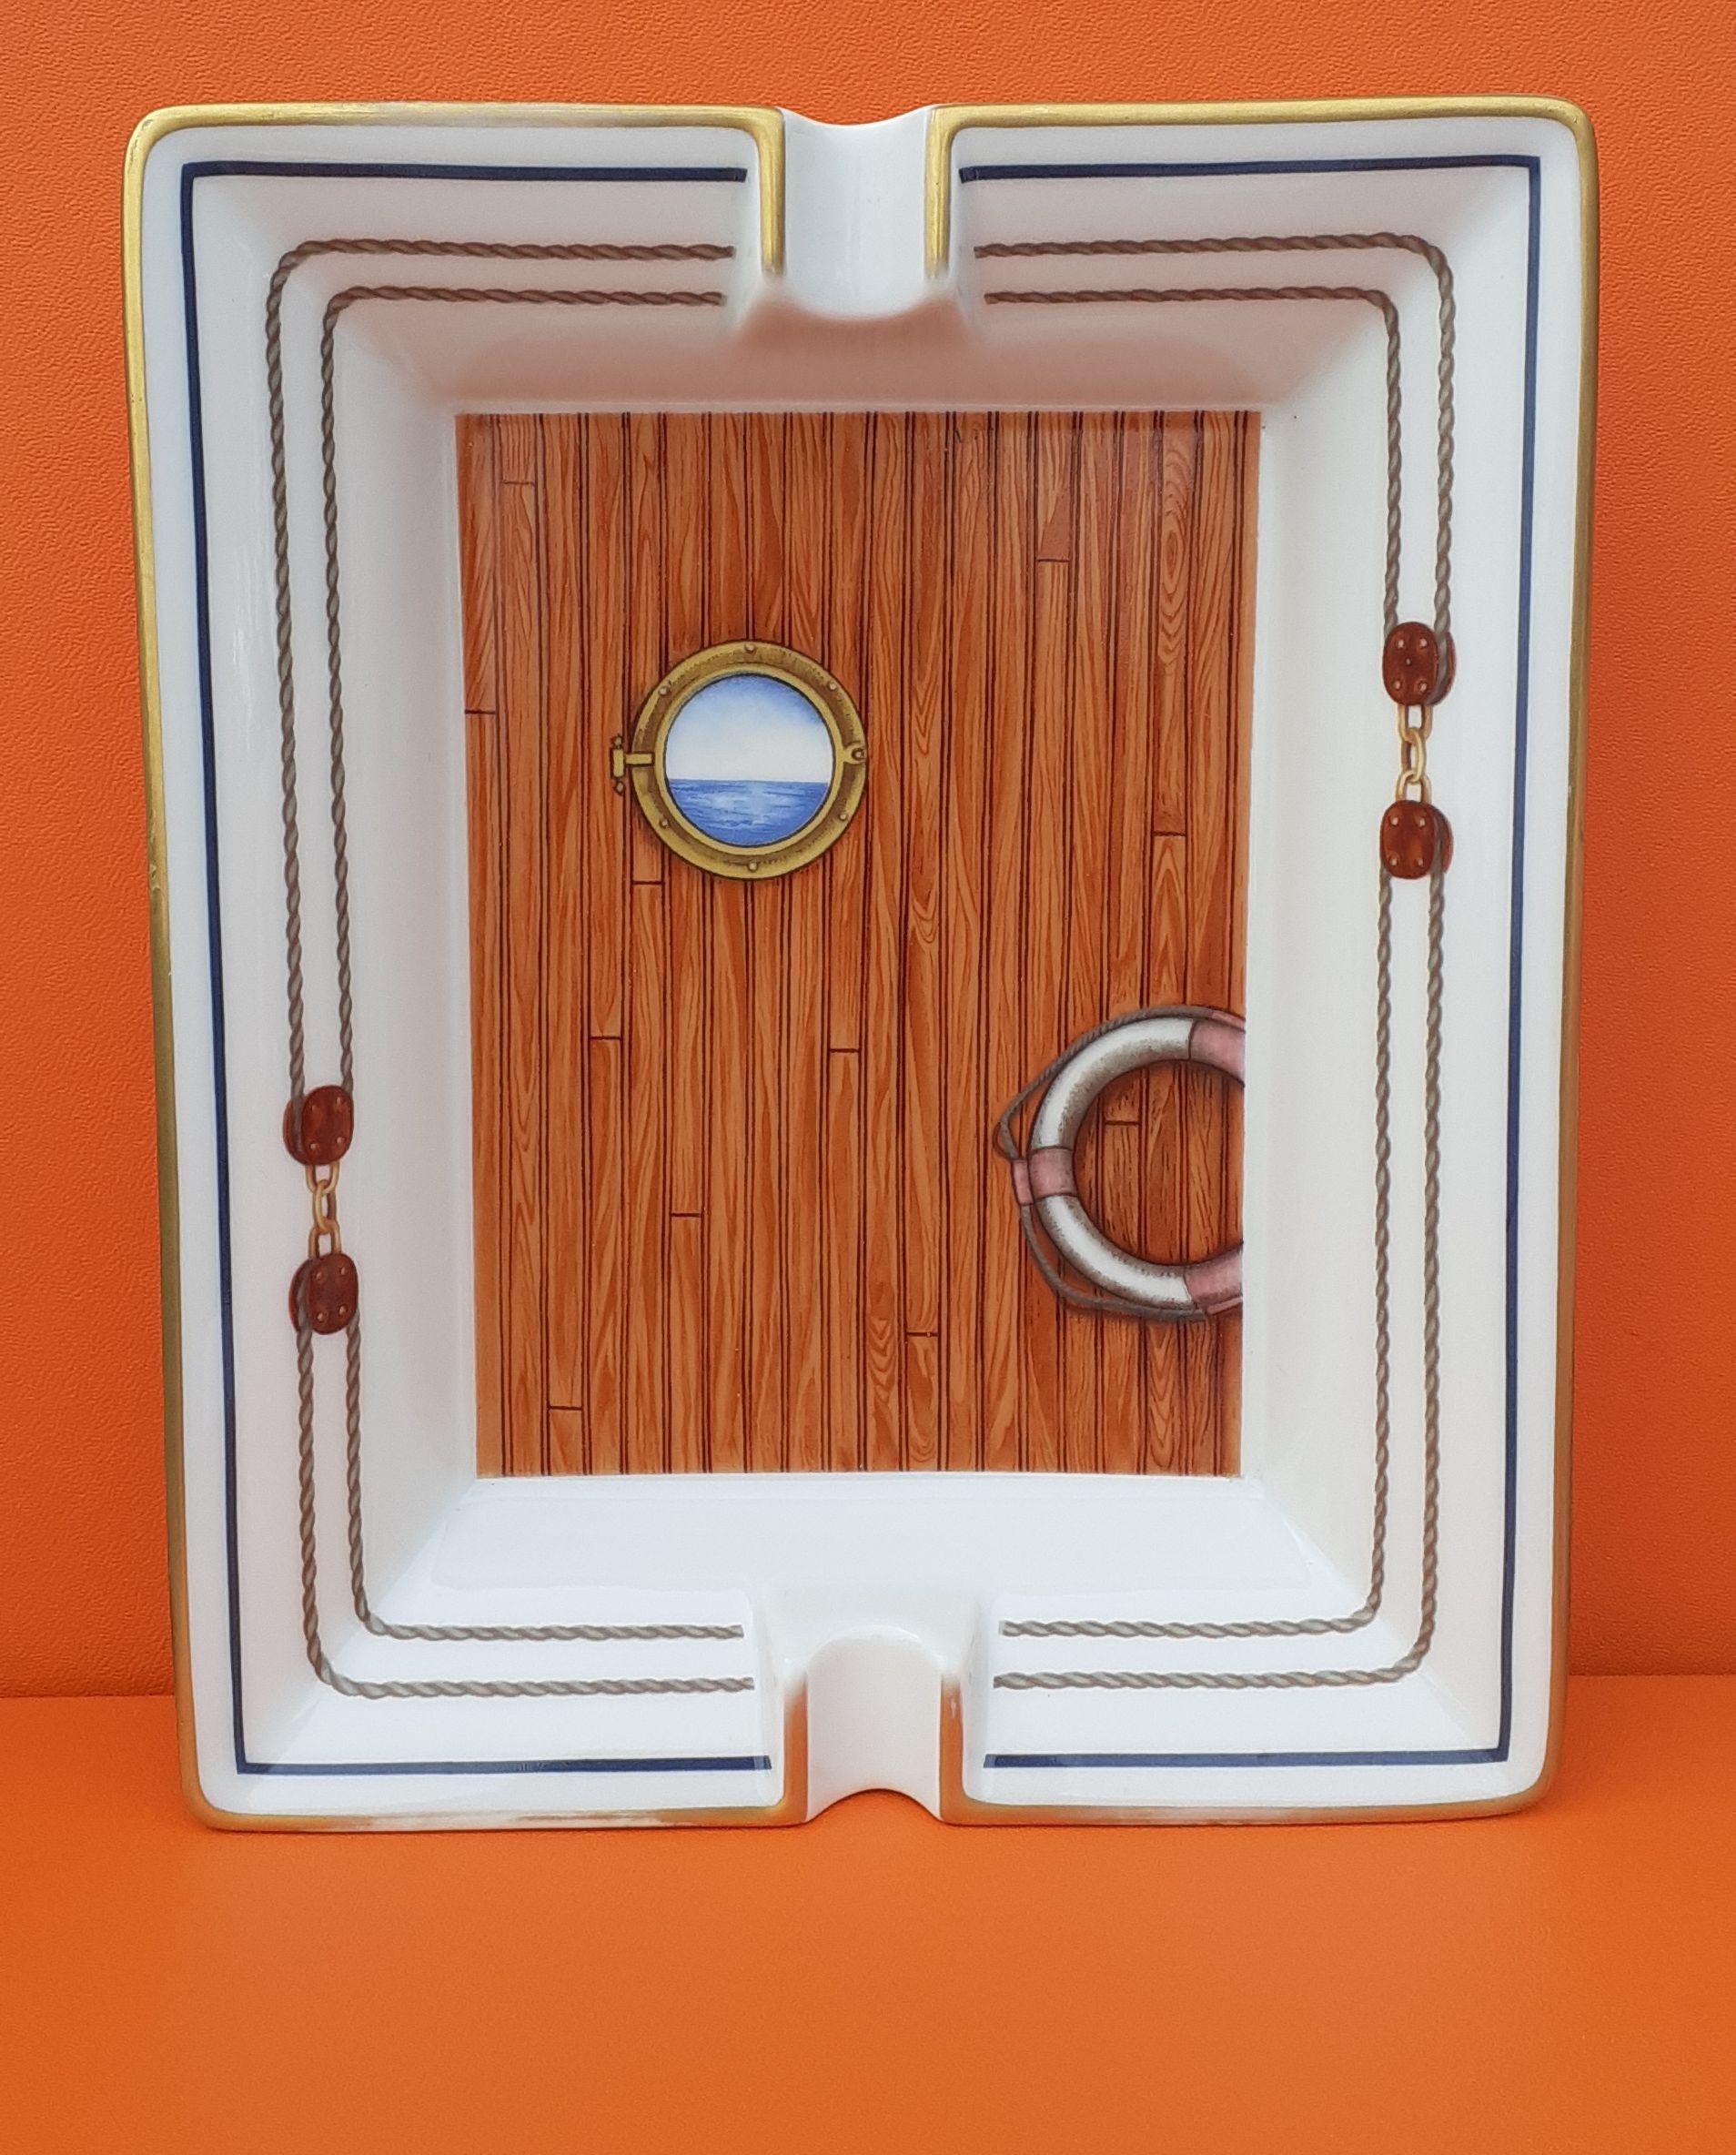 Beautiful Authentic Hermès Ashtray

Print: porthole, lifebuoy and pulleys

Made in France 

Probably Vintage

Made of printed Porcelain, golden edges

Colorways: White, Light Brown, Blue

The drawing is covered with varnish, which gives it a